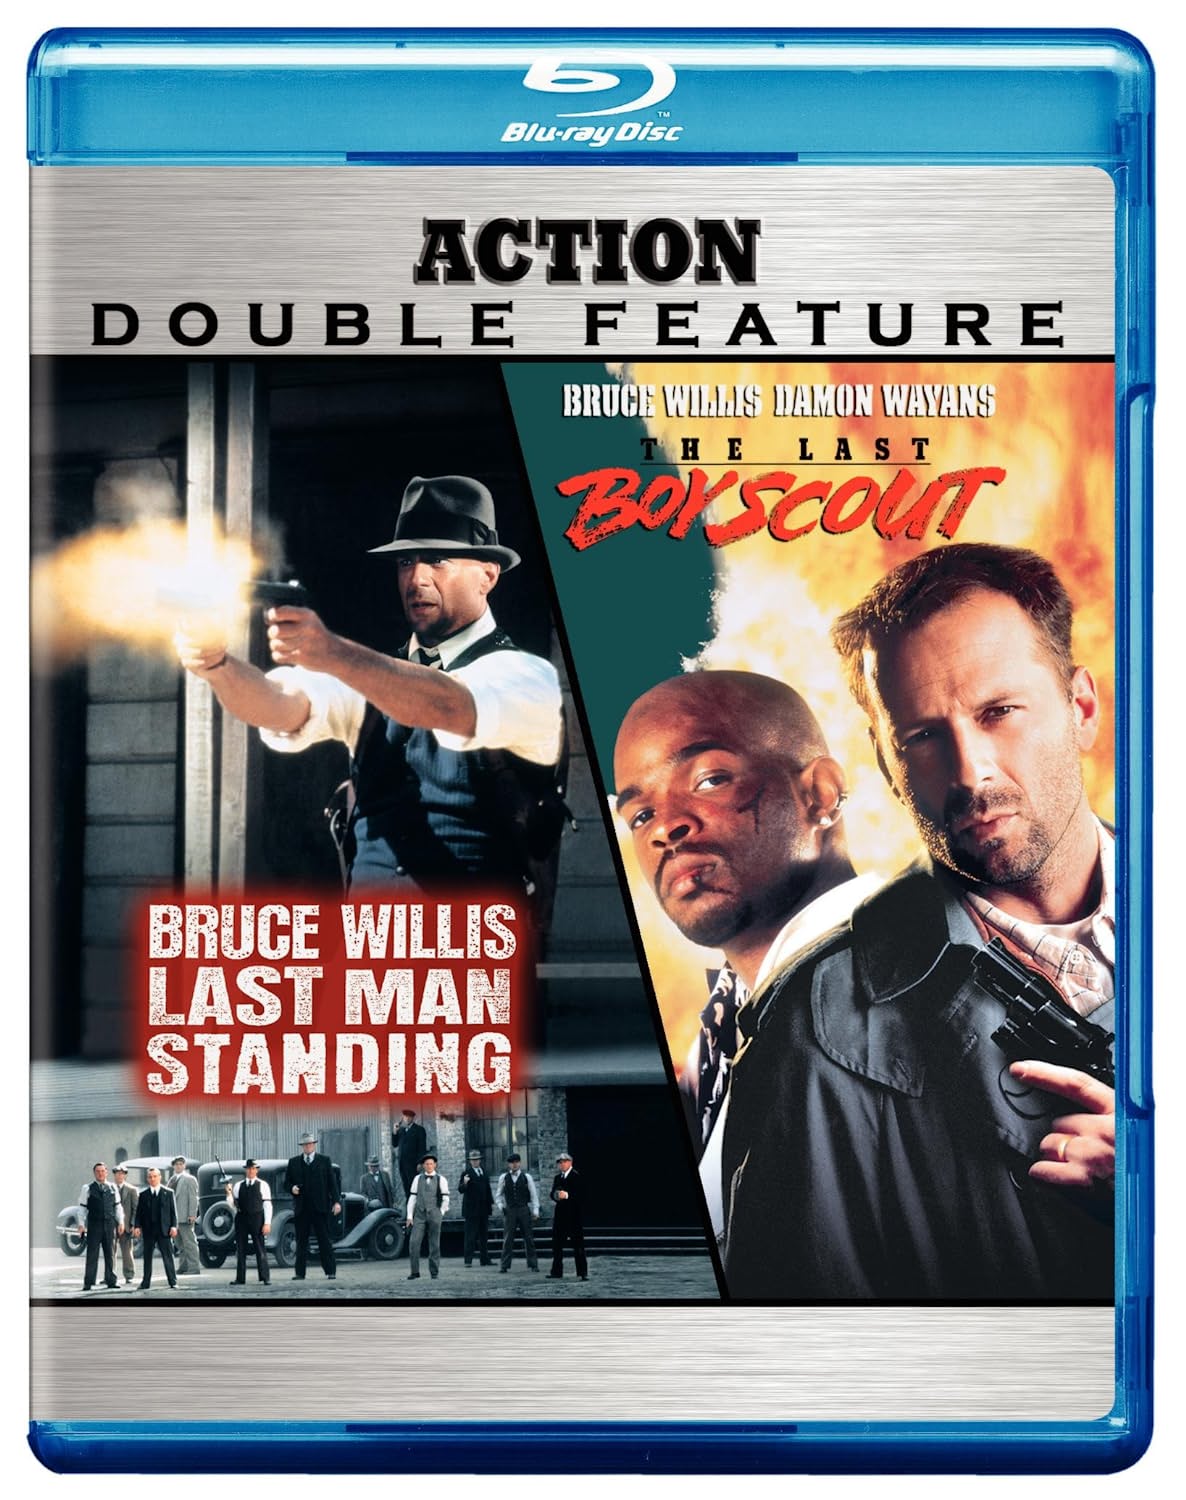 The Last Boy Scout/Last Man Standing (Blu-ray Double Feature) - Blu-ray [ 2010 ]  - Action Movies On Blu-ray - Movies On GRUV